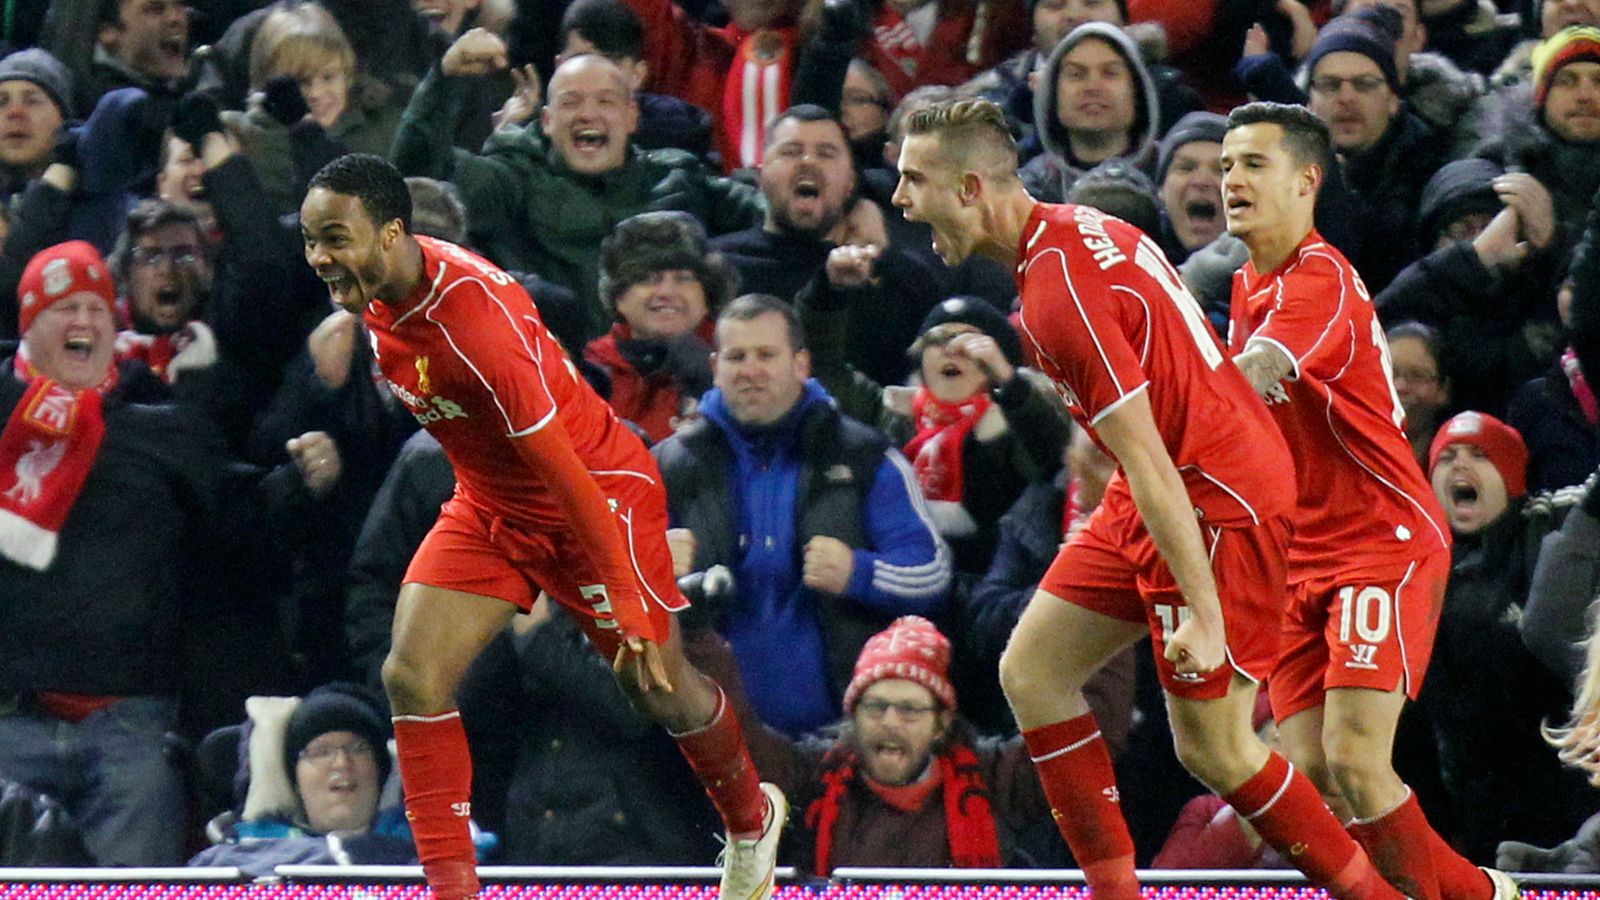 Liverpool 1 - 1 Chelsea - Match Report & Highlights1600 x 900